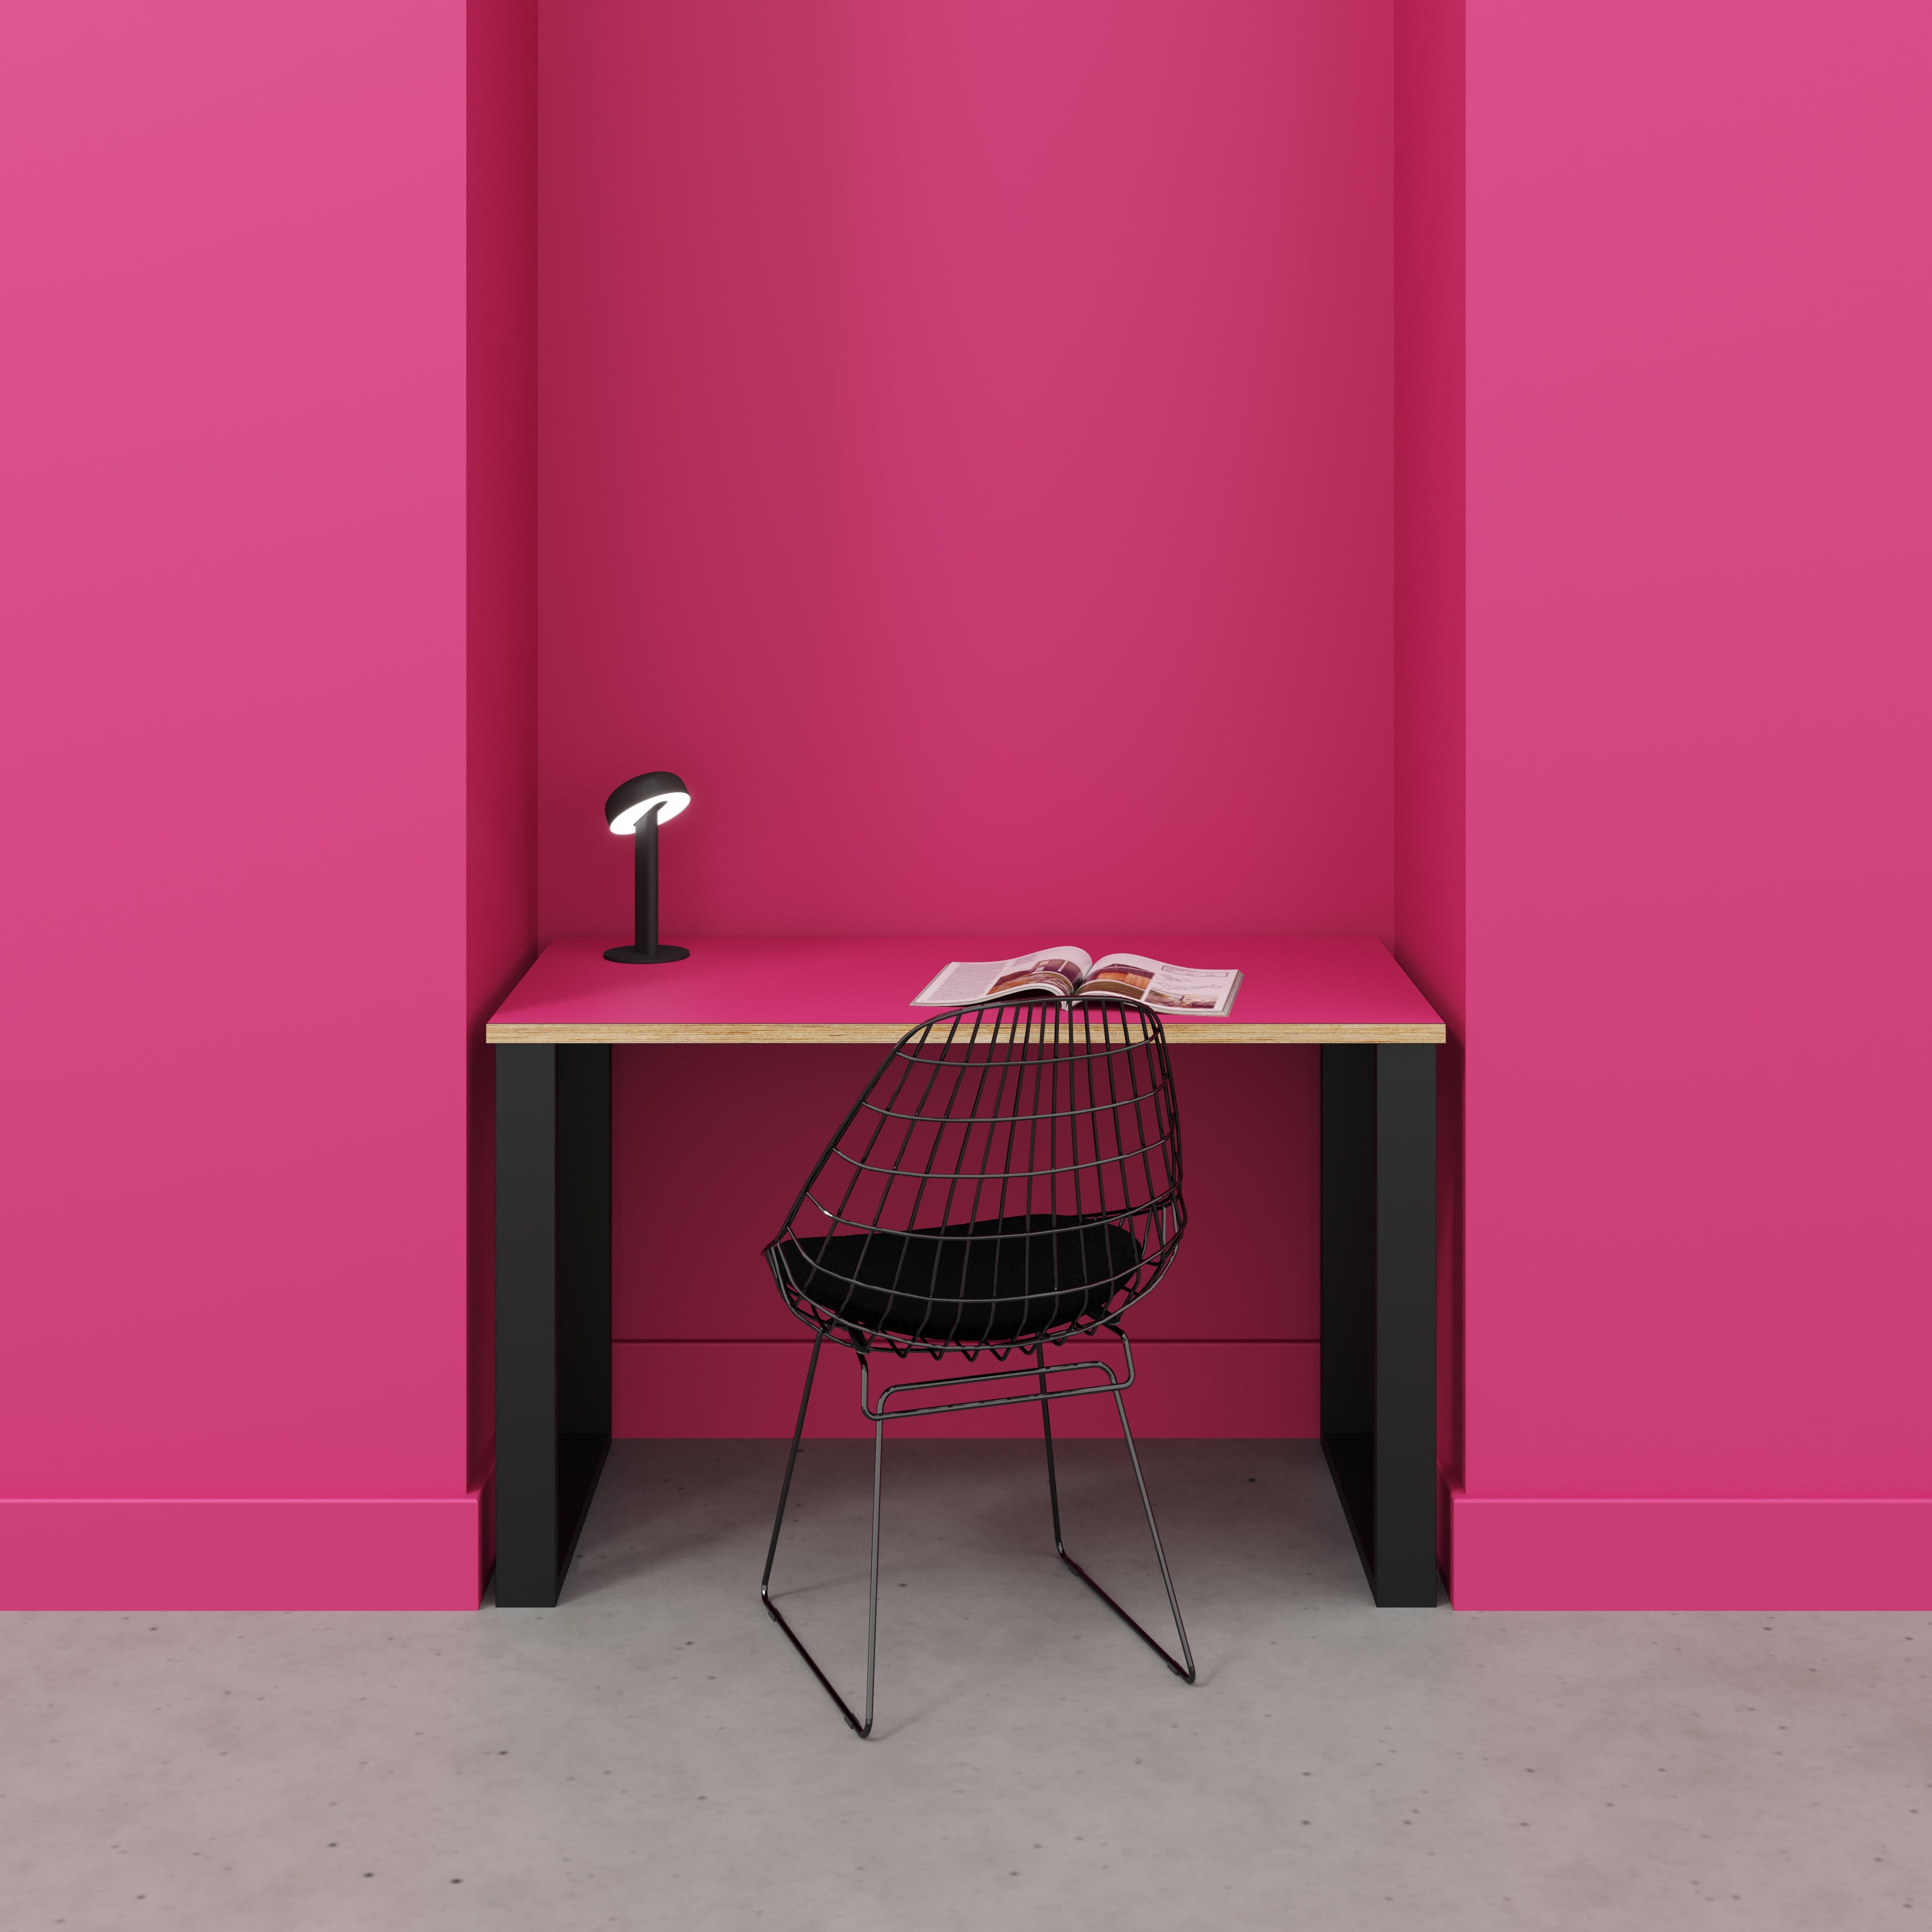 Desk with Black Industrial Legs - Formica Juicy Pink - 1200(w) x 600(d) x 735(h)